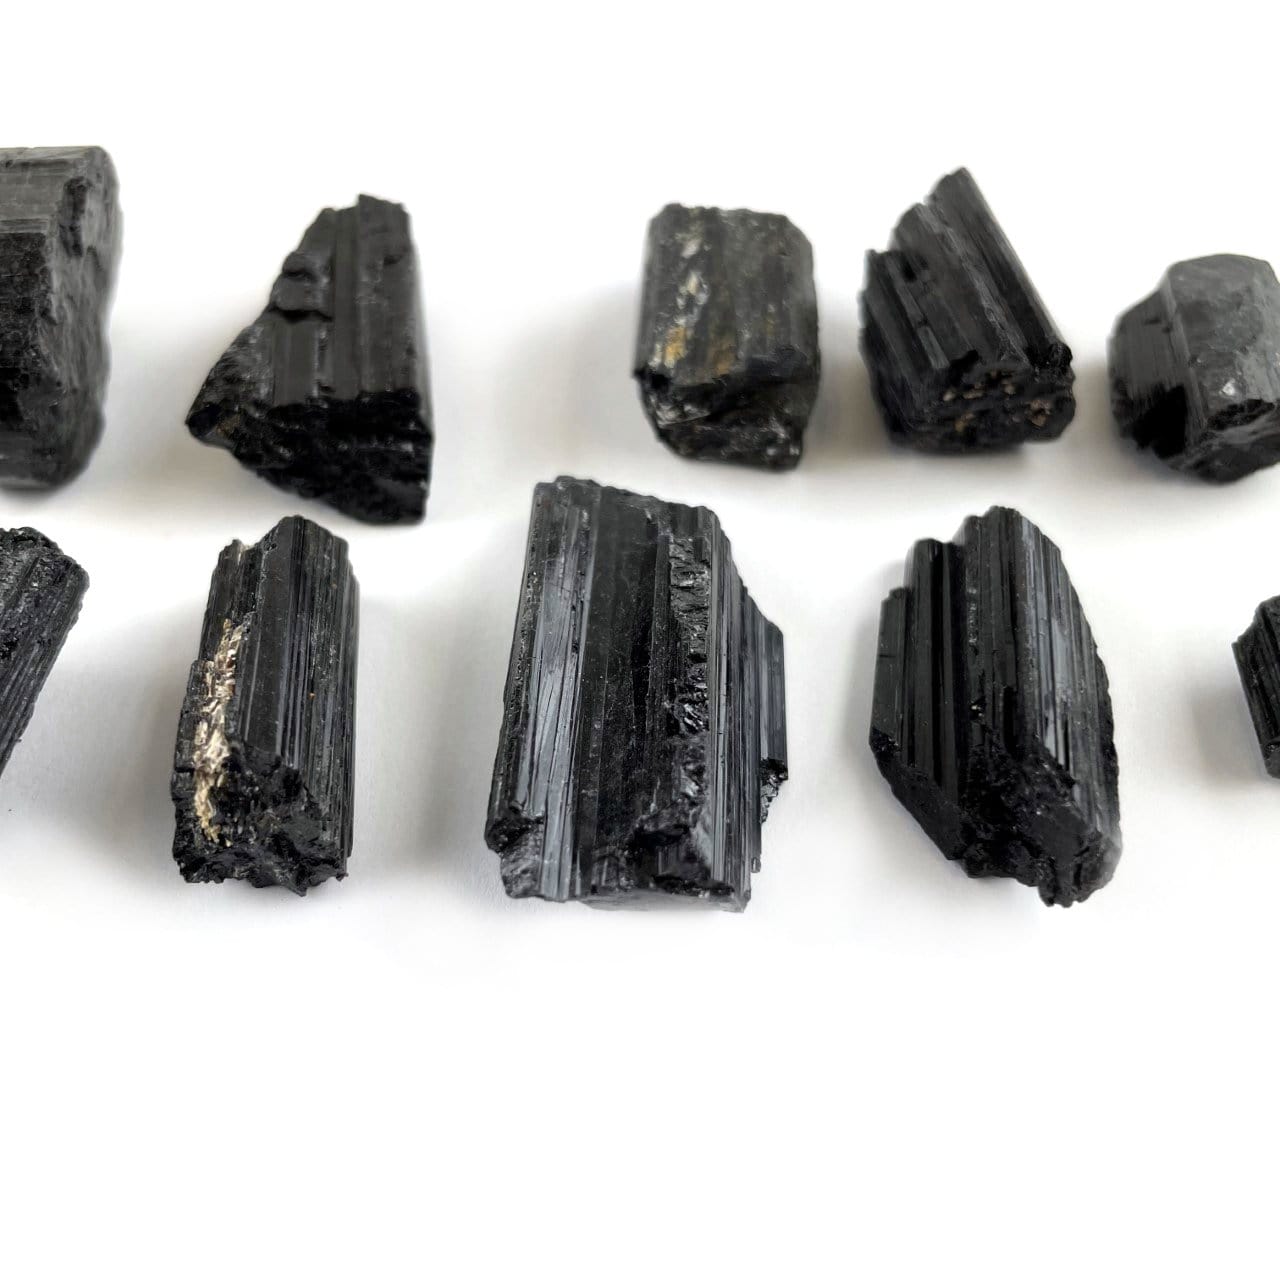 up close of some of the black tourmaline rods